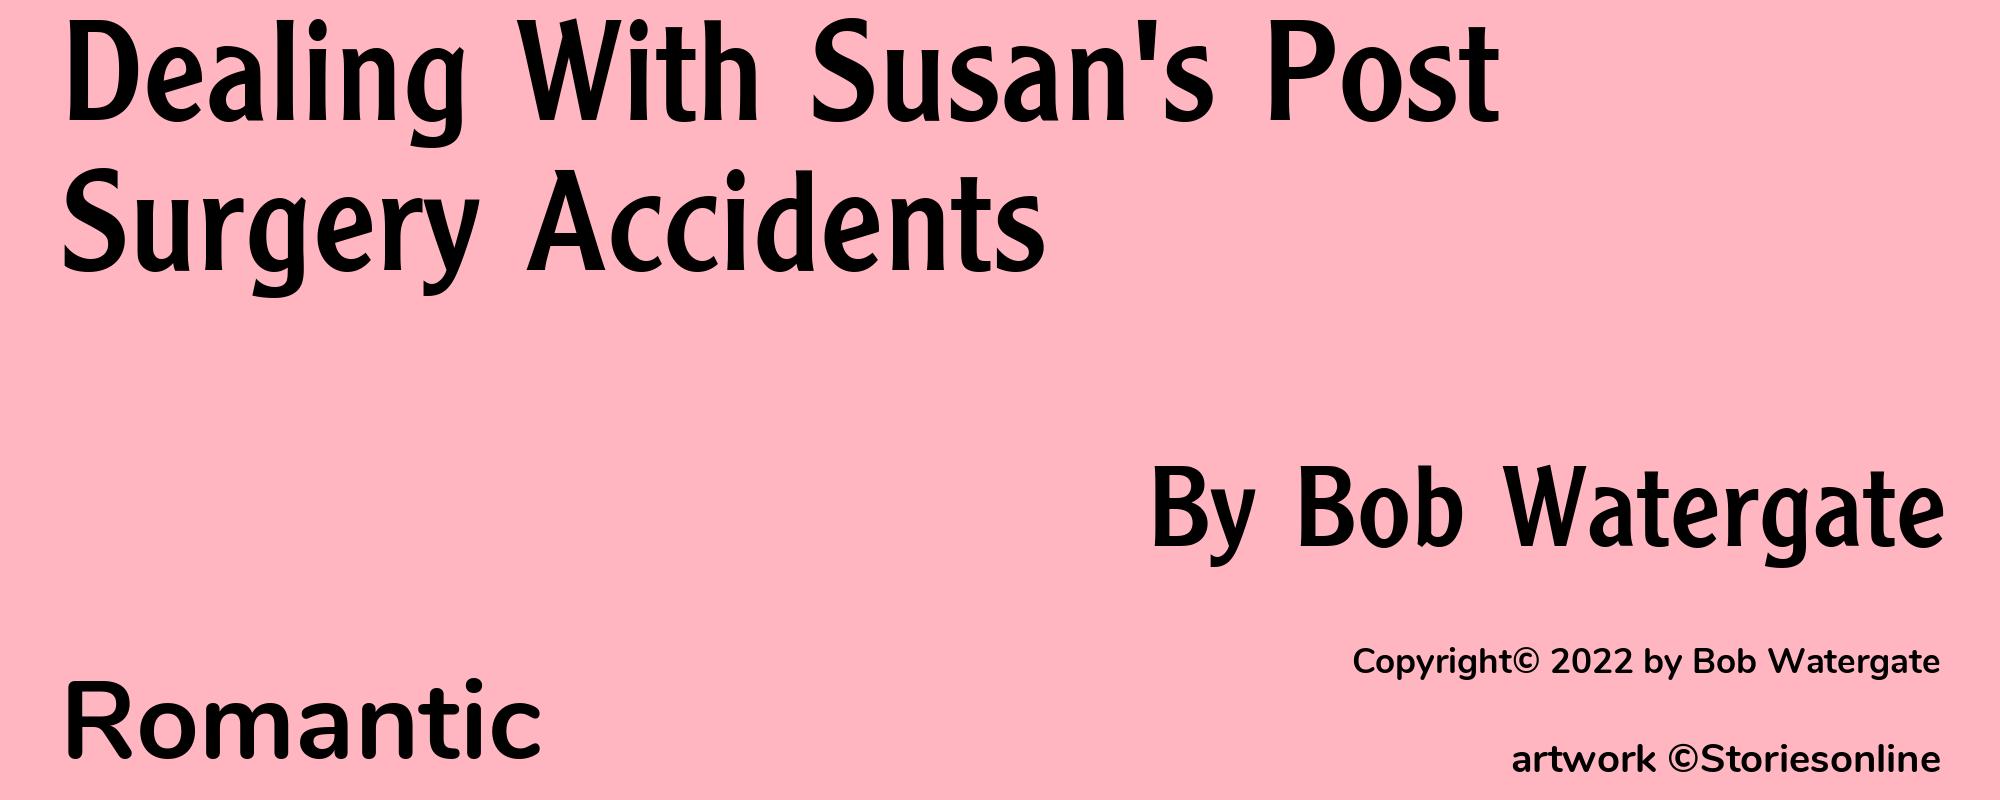 Dealing With Susan's Post Surgery Accidents - Cover